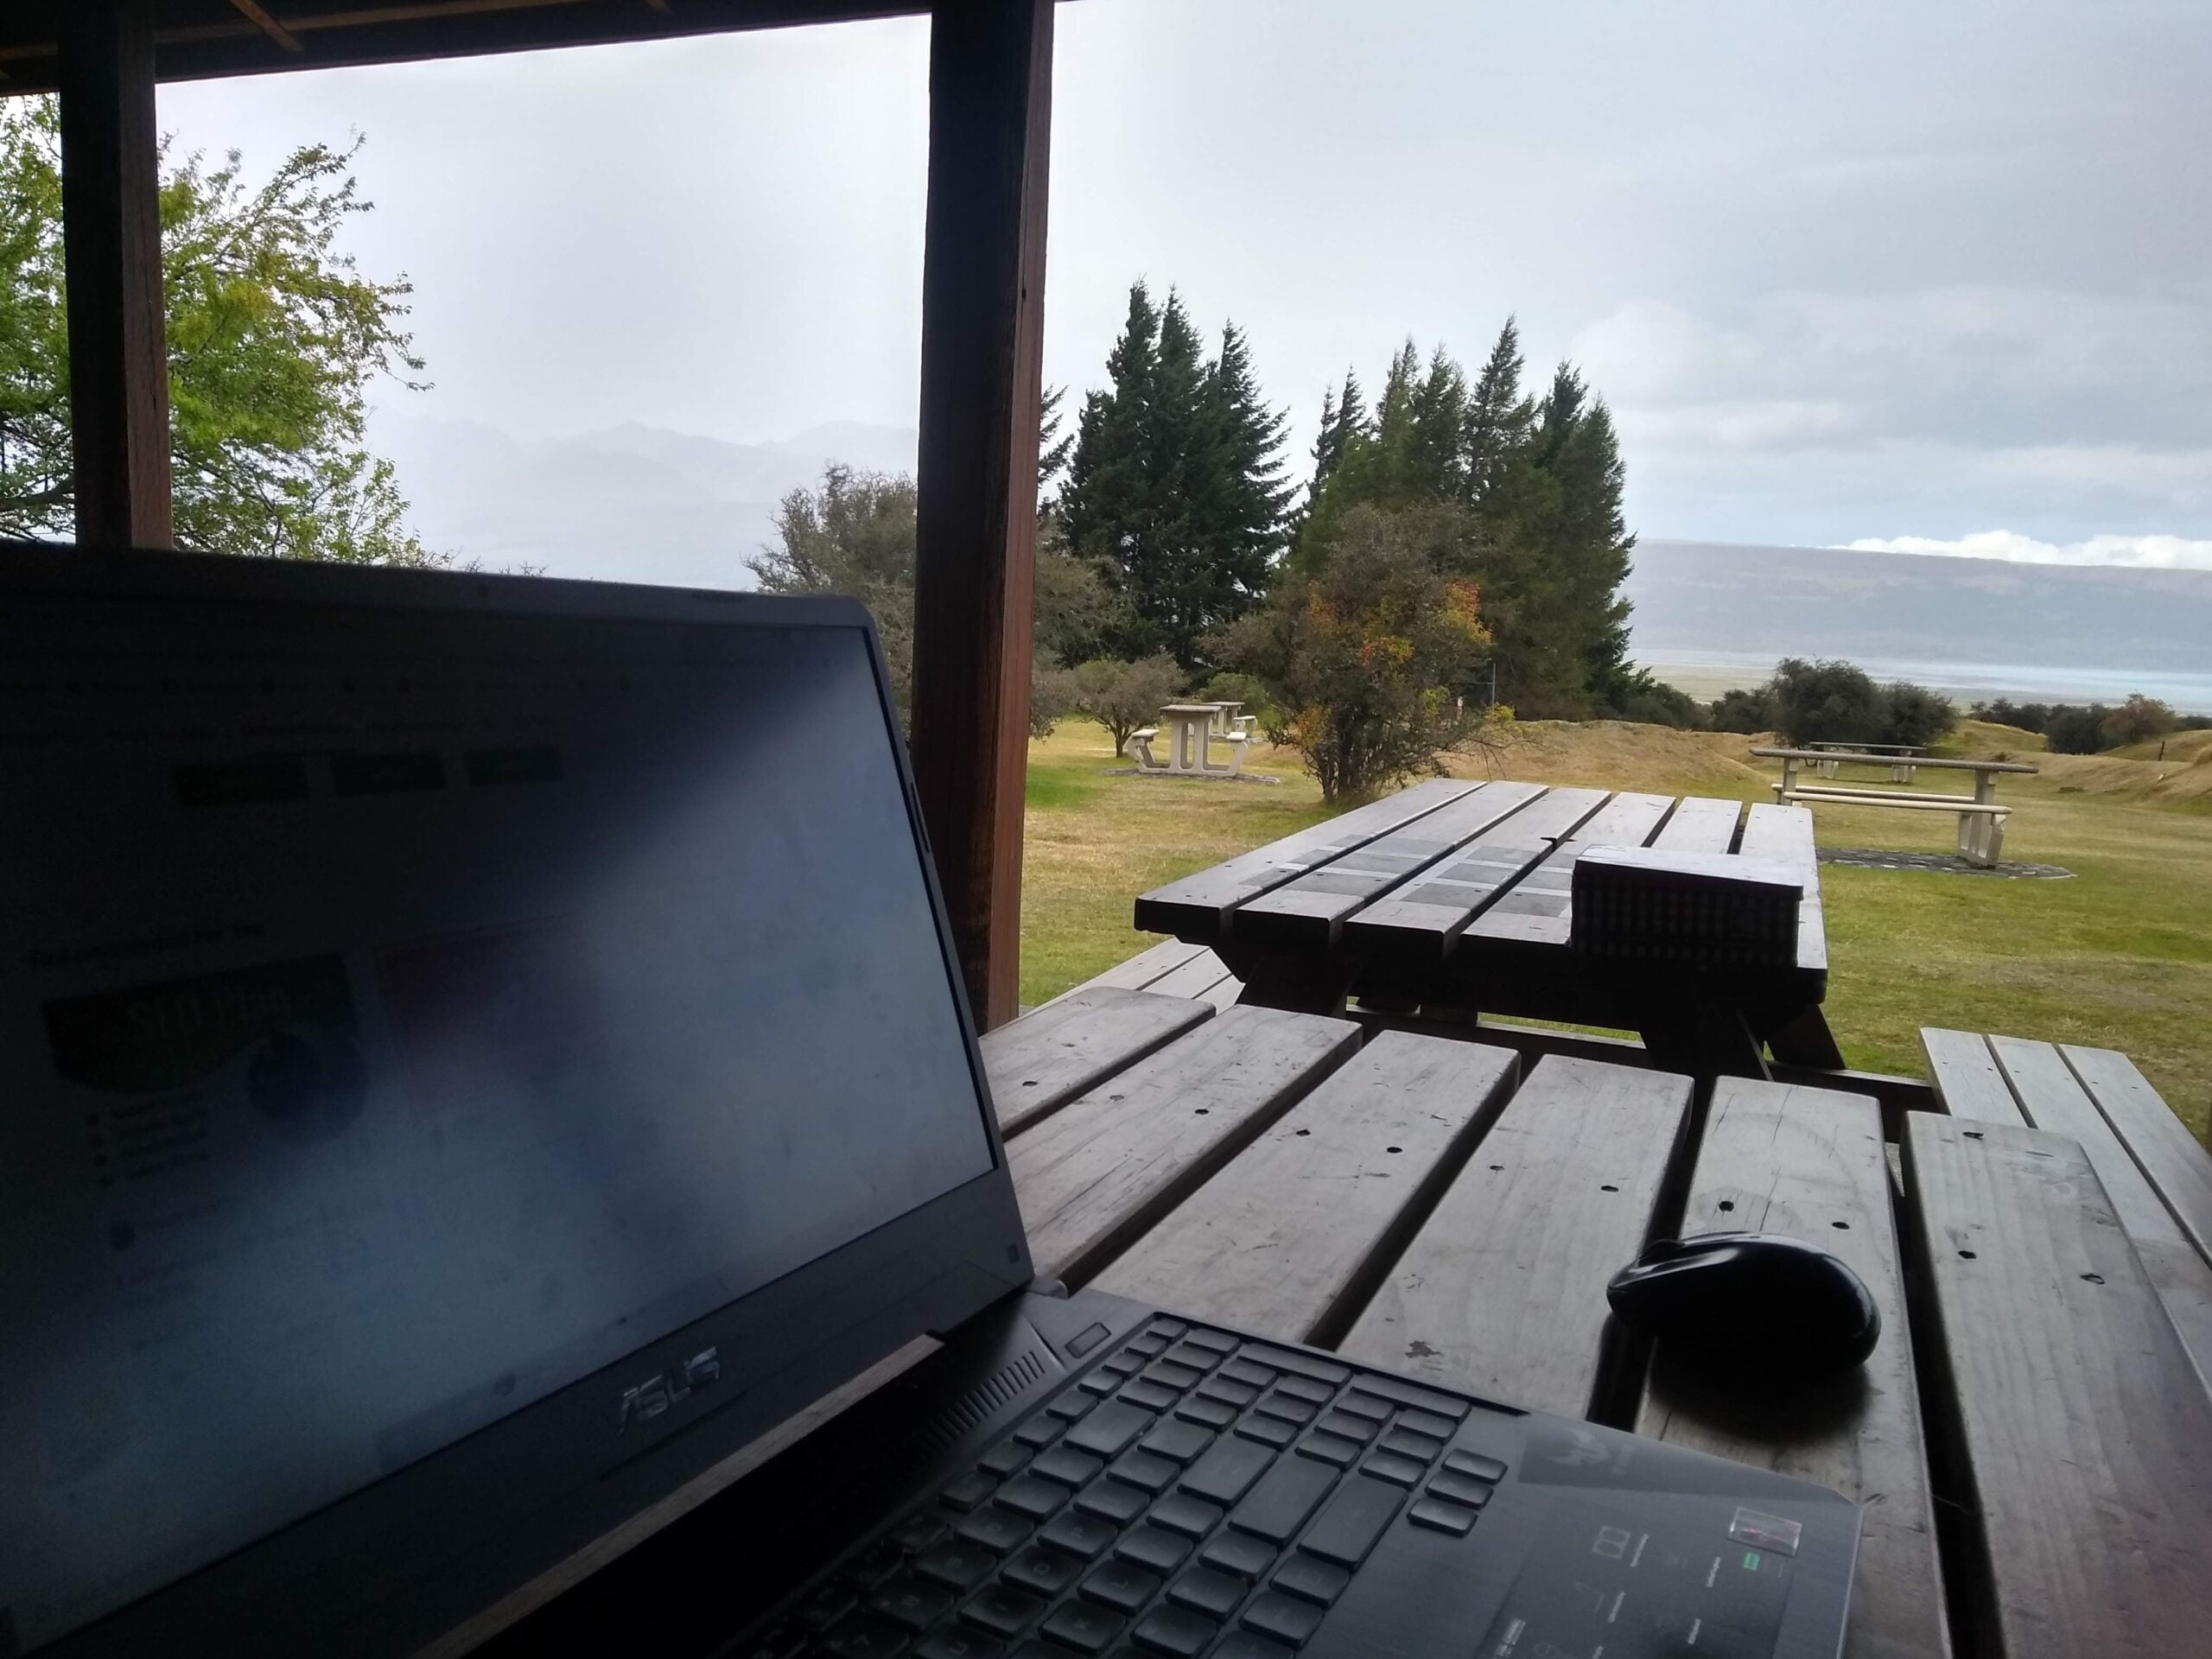 Remote Work: A laptop on a picnic table with greenery and a lake in the distance